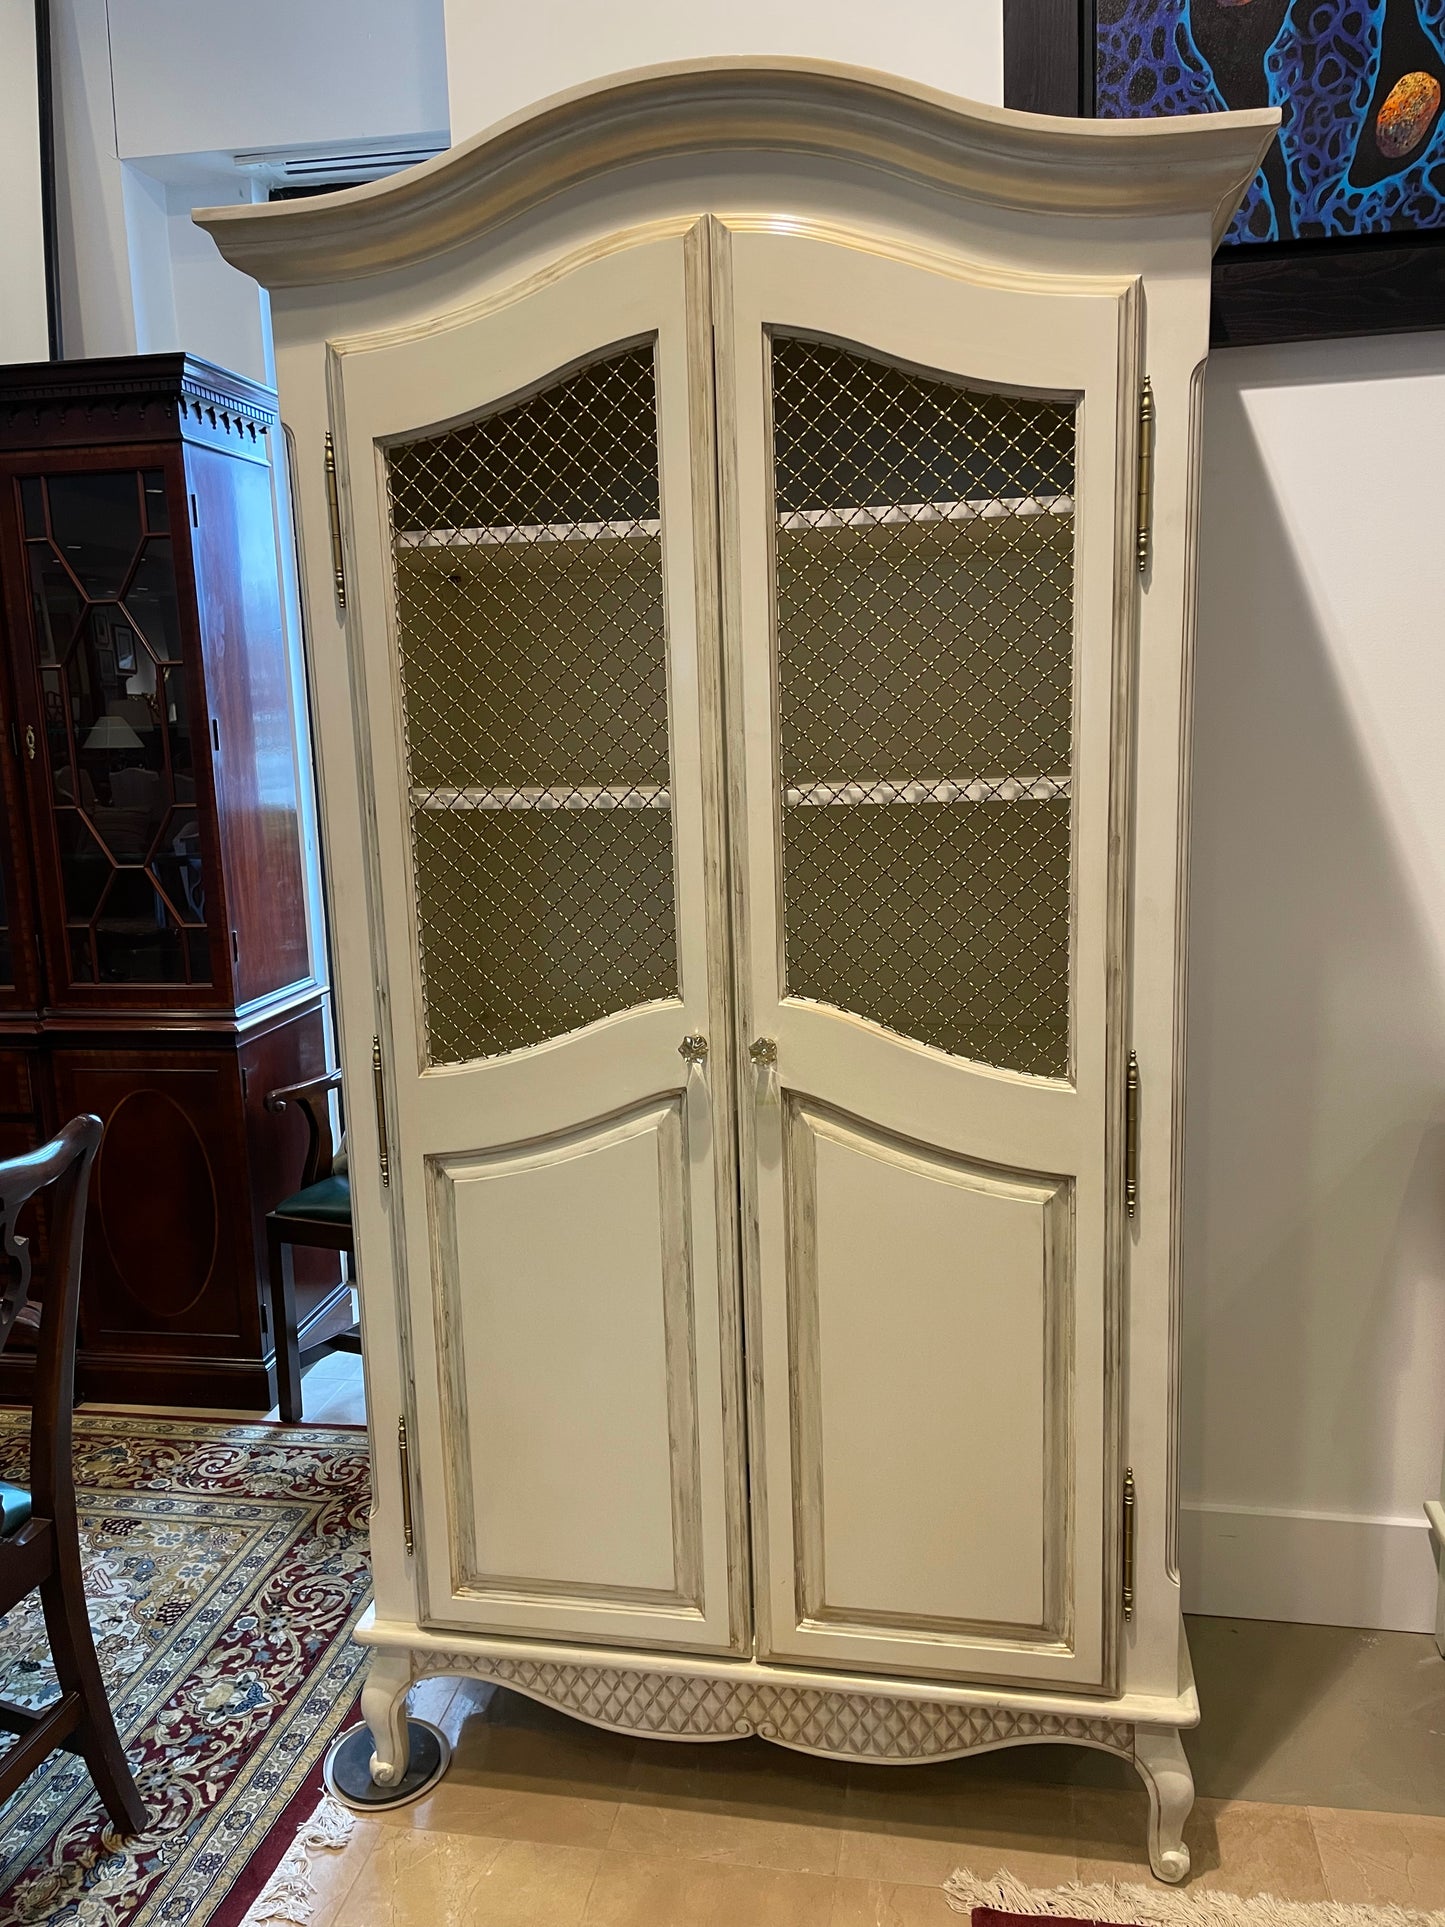 AFK Furniture "Grand Armoire" in Versailles Pink